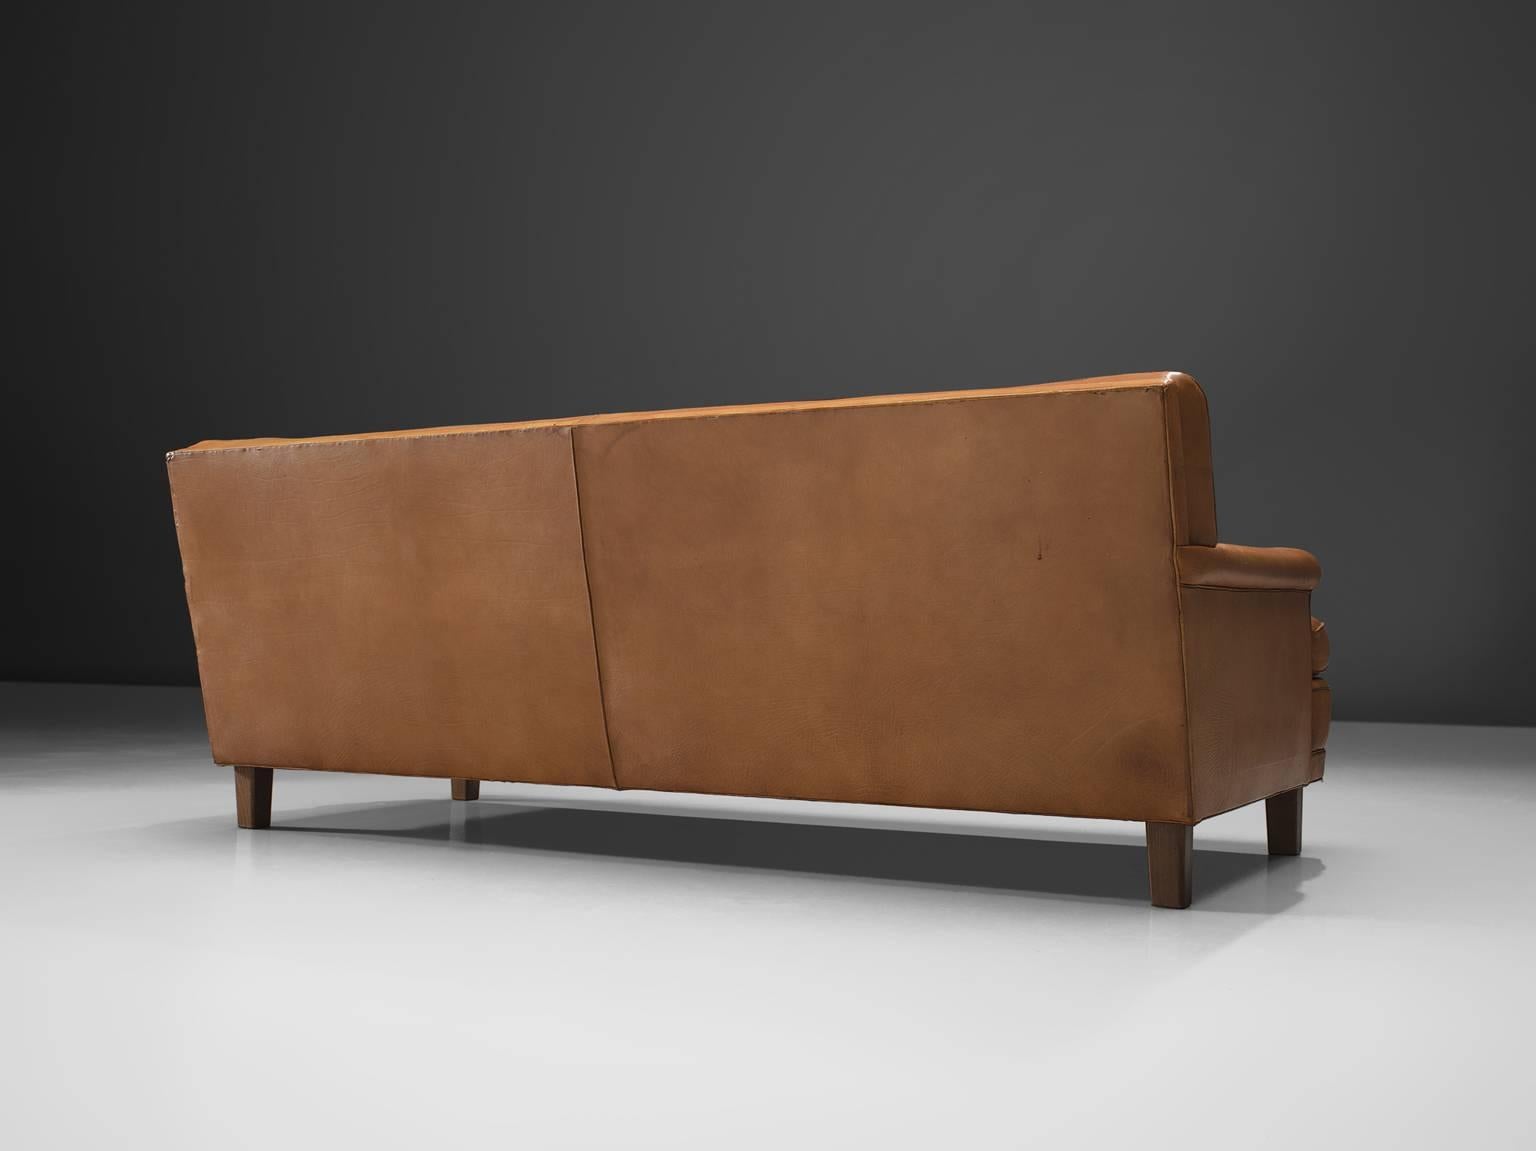 Mid-20th Century Arne Norell Sofa 'Merkur' Cognac Leather and Wood Sweden, circa 1964